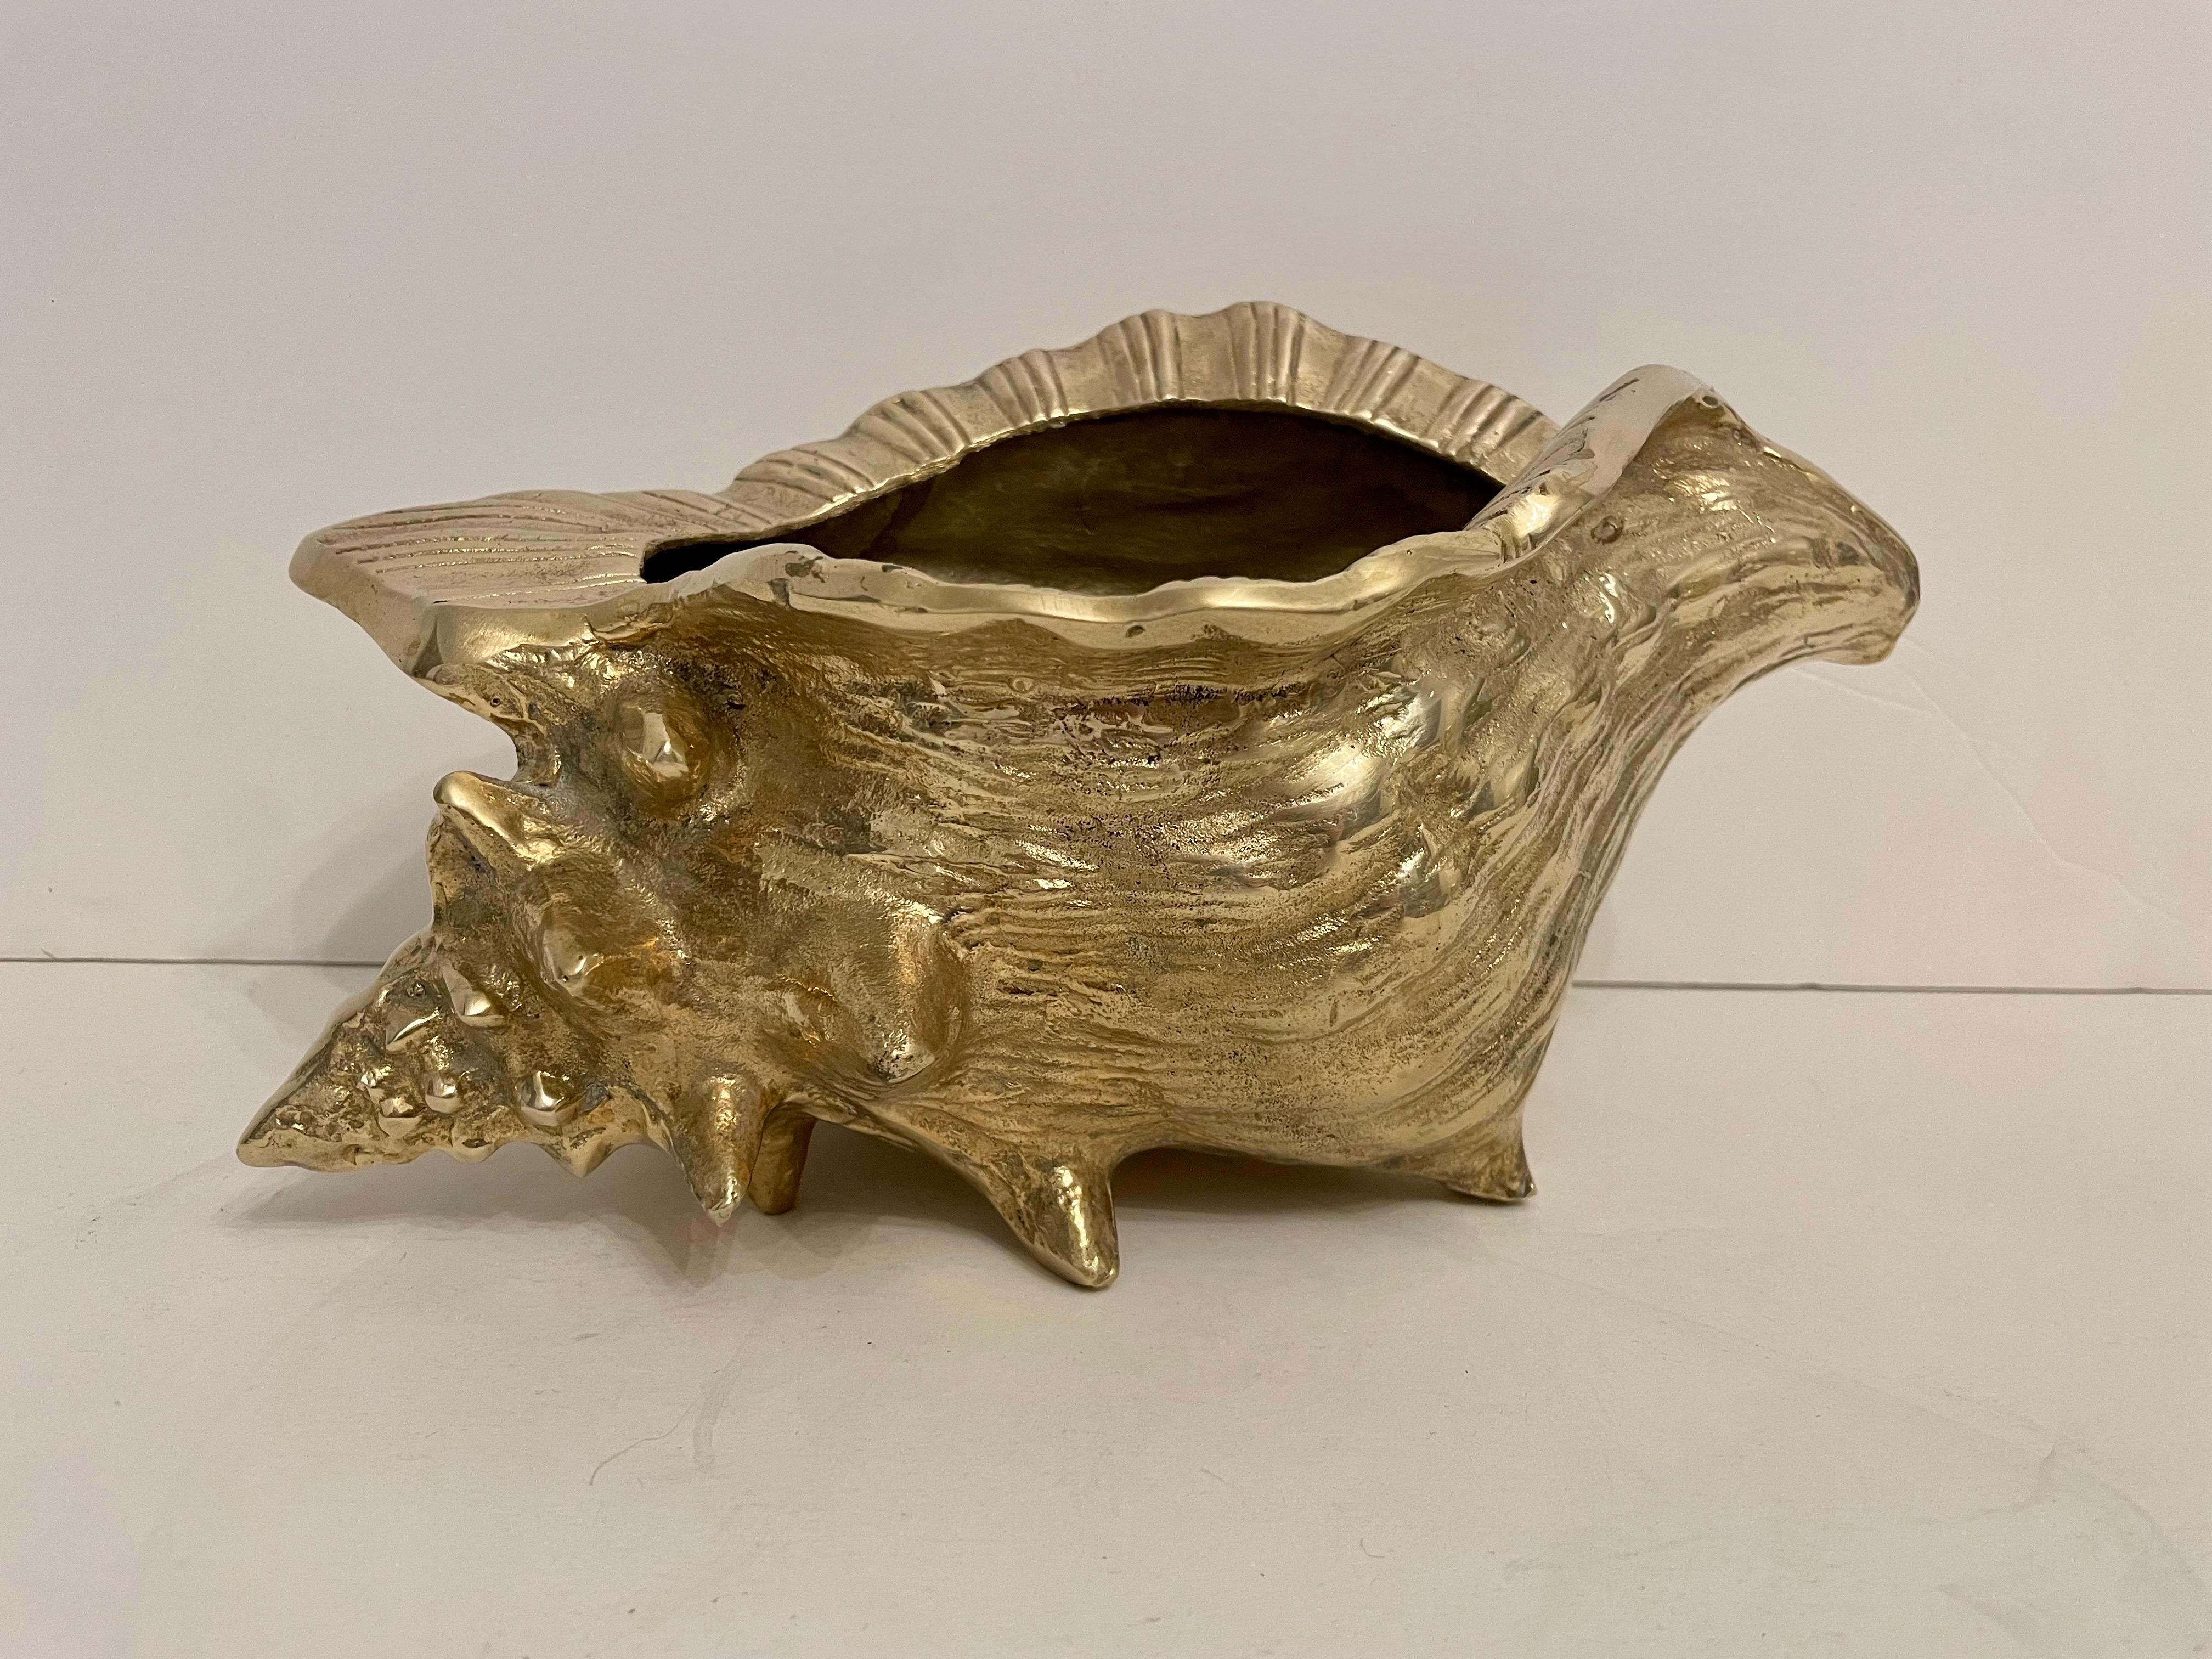 Very large vintage brass seashell nautilus planter. Very detailed. Good overall condition, hand polished. Can be used  inside or out. Measures an impressive 11